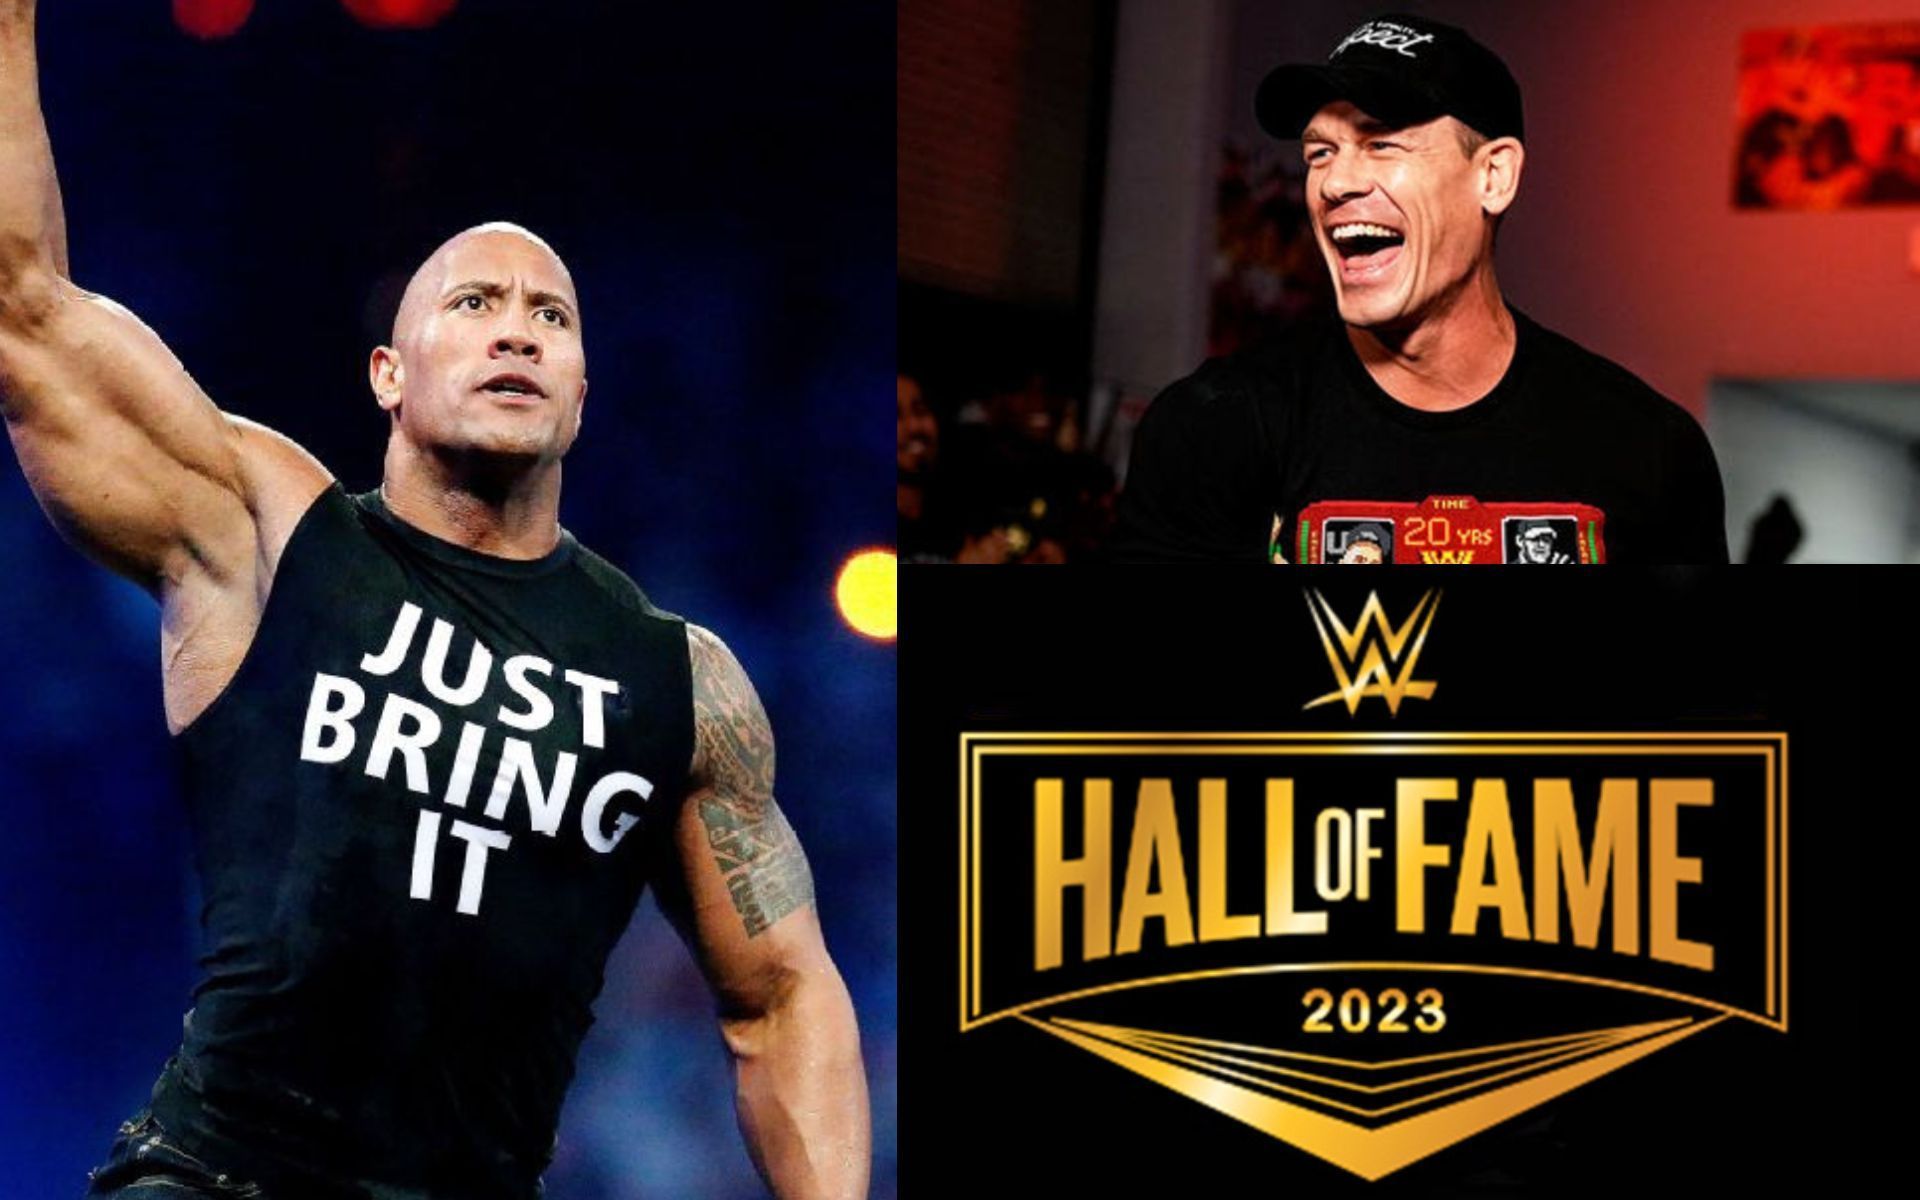 Cena and The Rock are two of the most adored WWE Superstars of all time.